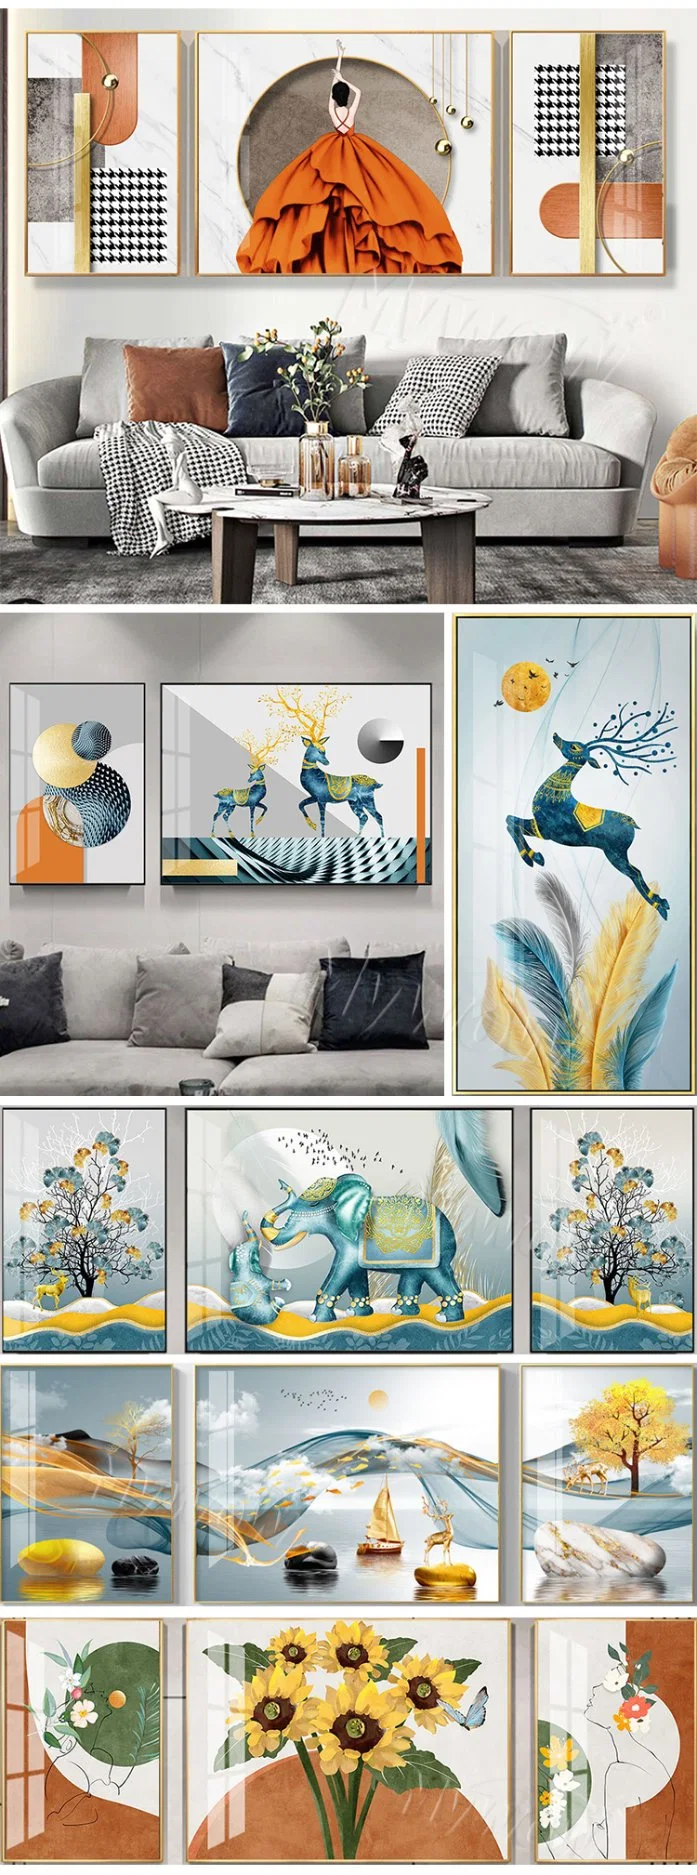 New Arrival Modern Design Wall Artwork Painting for Living Room Decoration